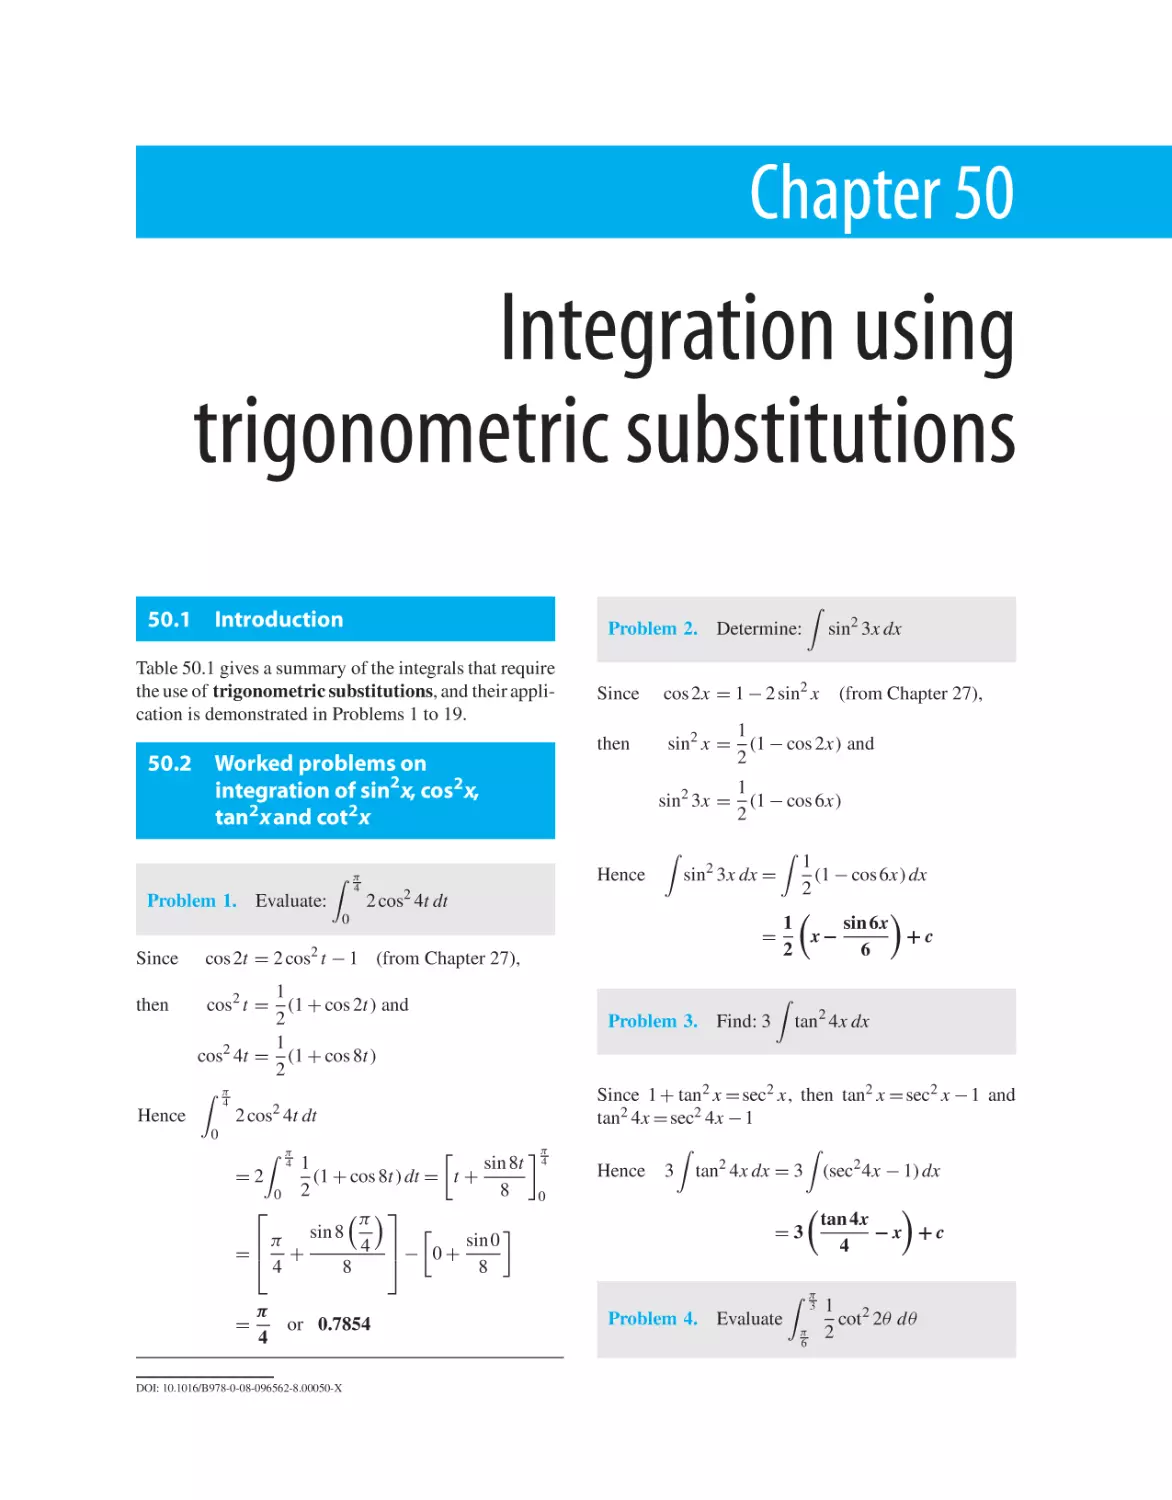 Chapter 50. Integration using trigonometric substitutions
50.1 Introduction
50.2 Worked problems on integration of sin2x, cos2x, tan2x and cot2x